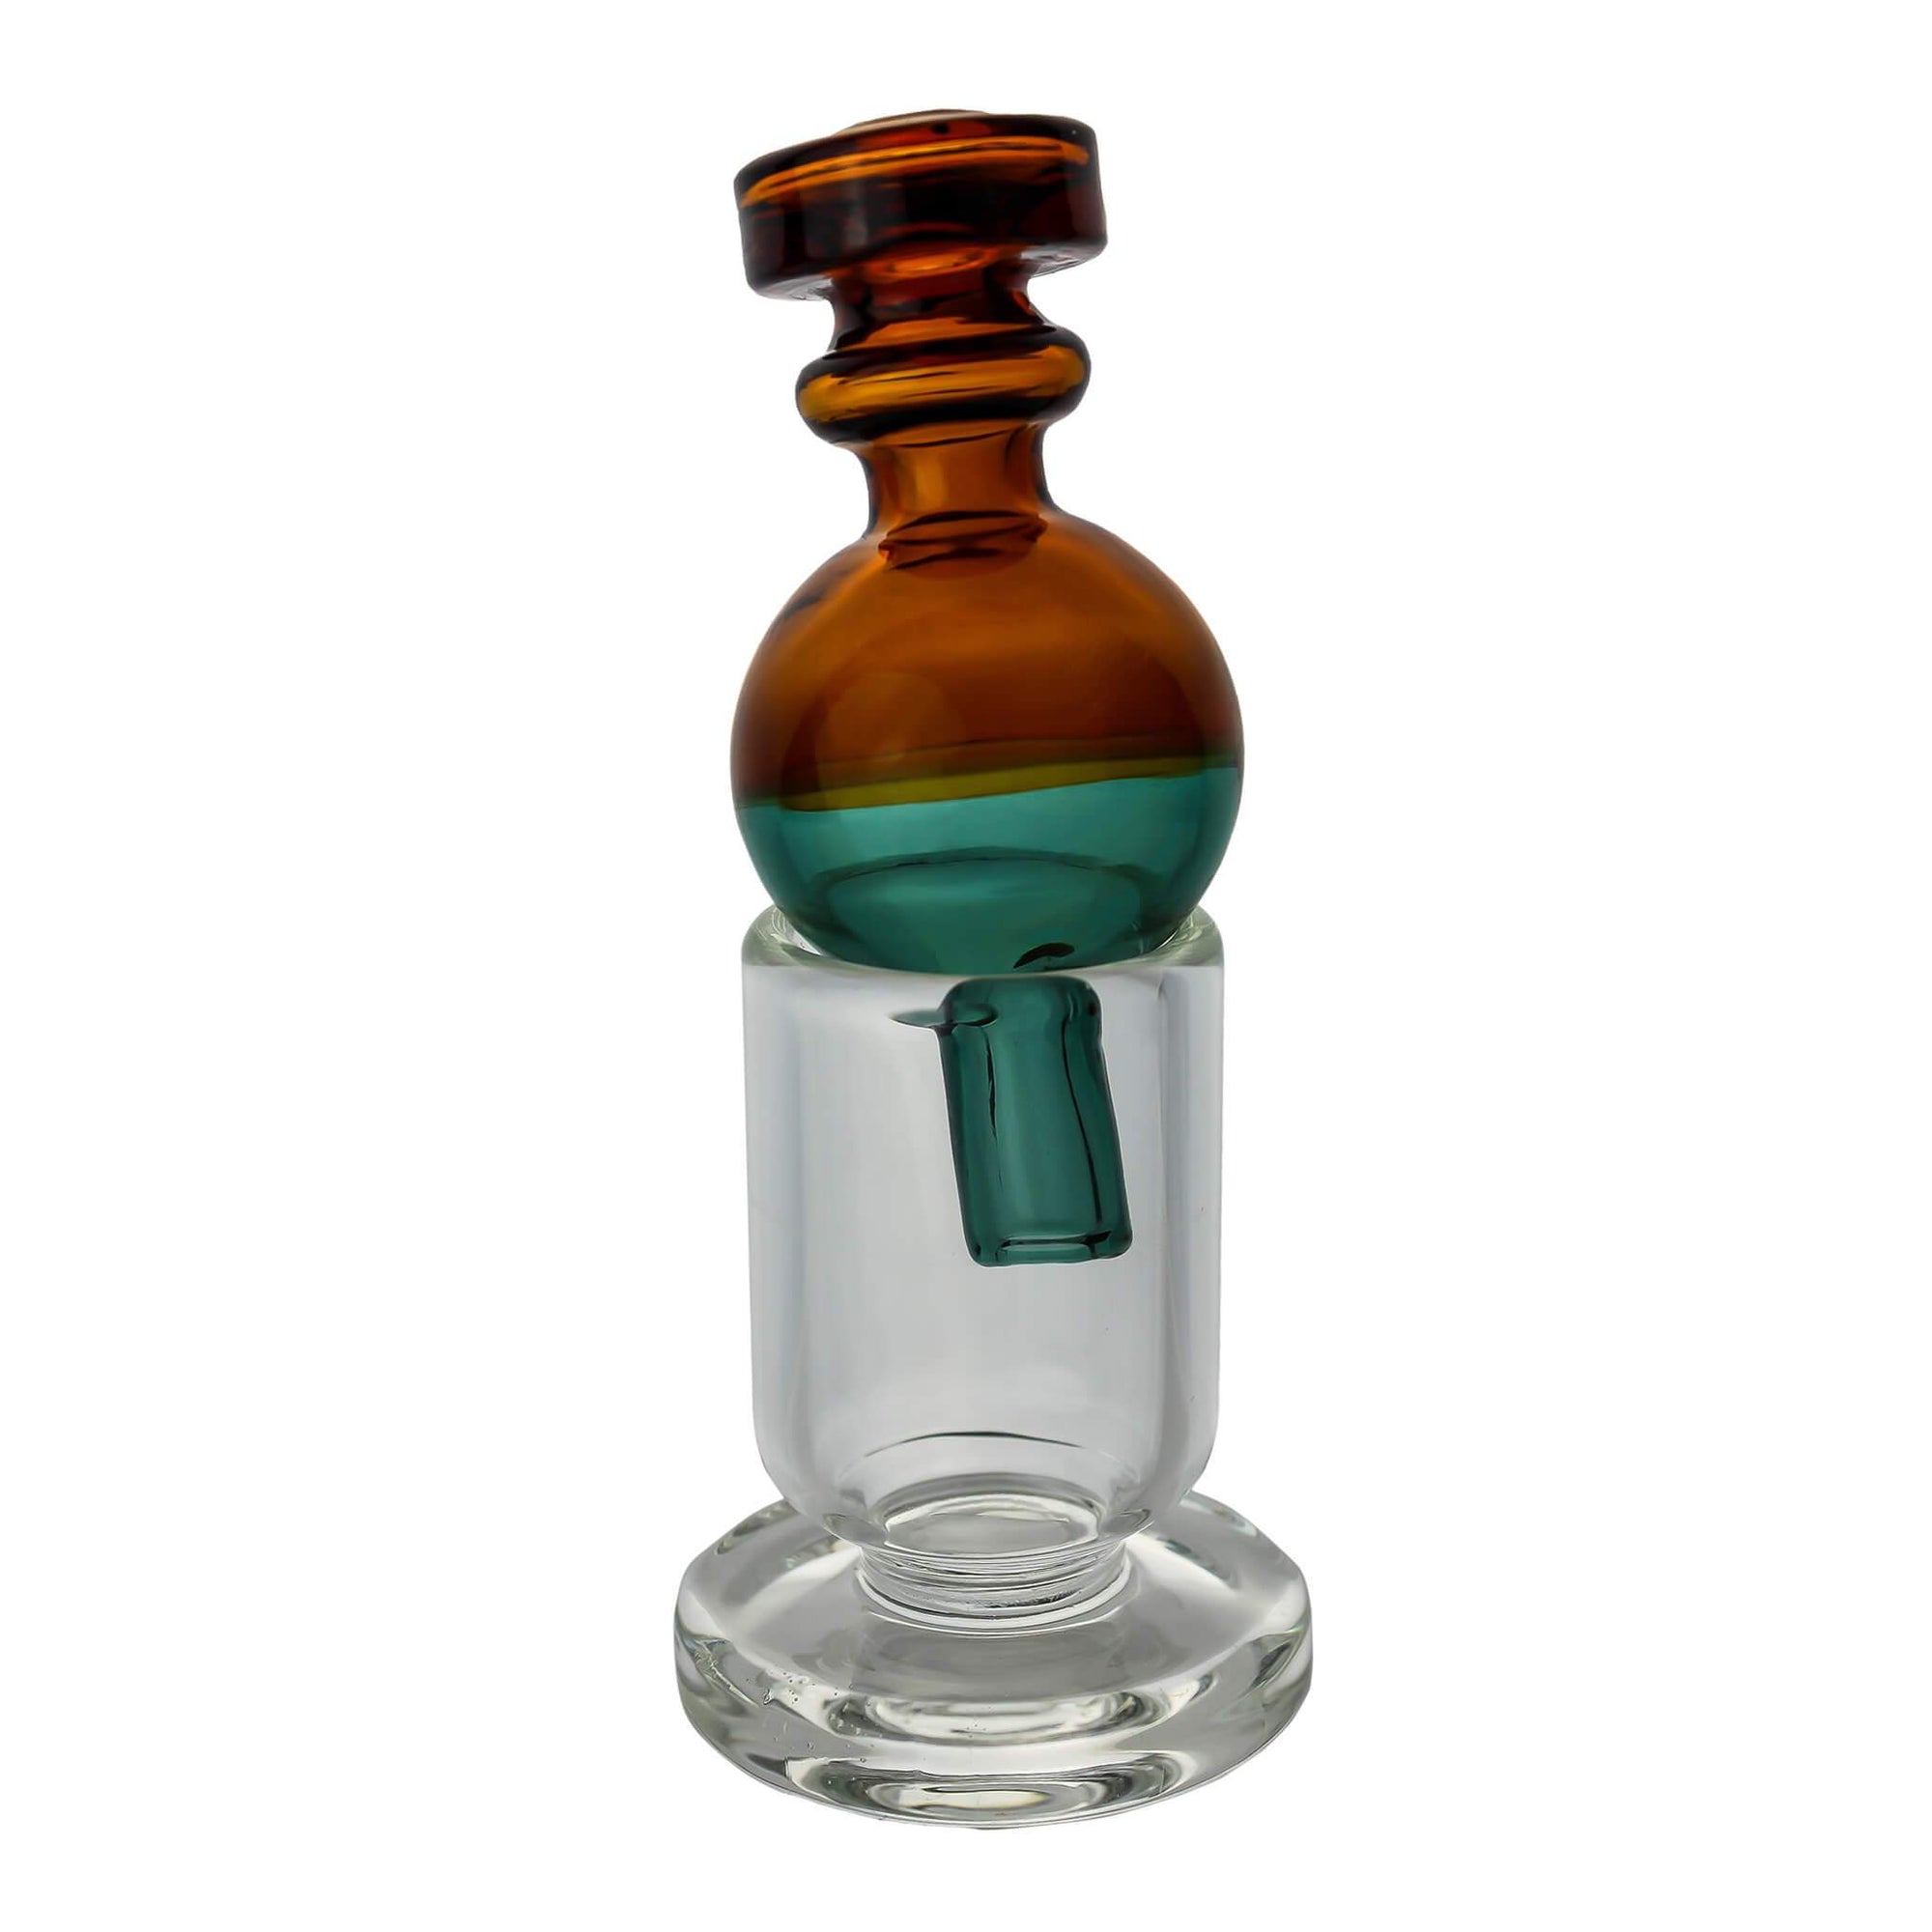 Carb Cap Holder (Terp Pearl Holder) | In Carb Cap Holder Alternate View | the dabbing specialists